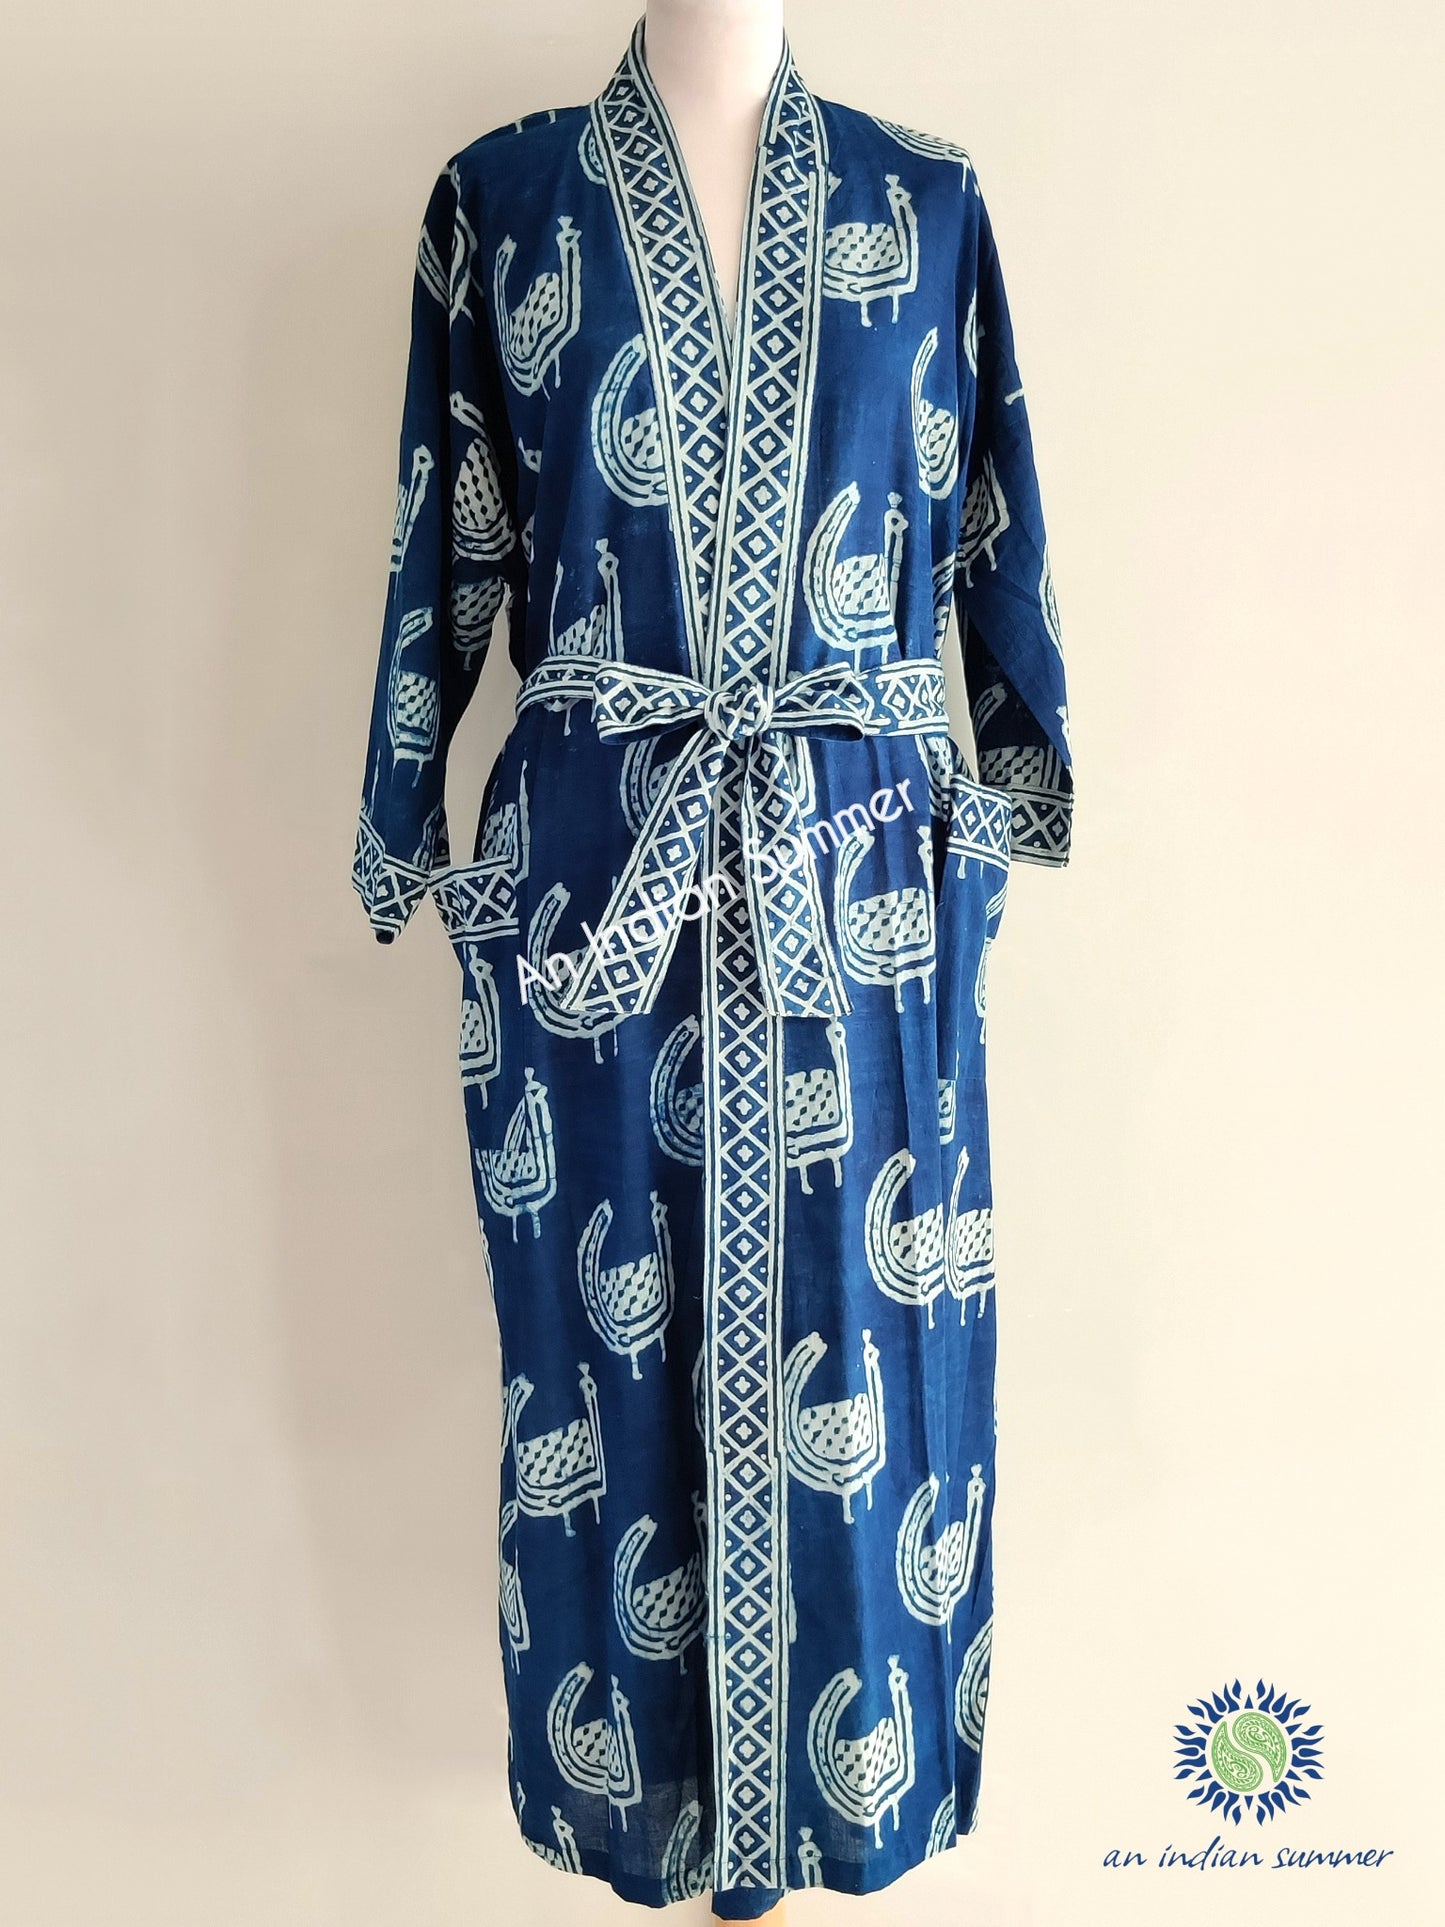 Long Kimono Robe | Natural Indigo Dyed Plant Dye | Peacock Design Abstract Block Print | Hand Block Printed | Cotton Voile | An Indian Summer | Seasonless Timeless Sustainable Ethical Authentic Artisan Conscious Clothing Lifestyle Brand